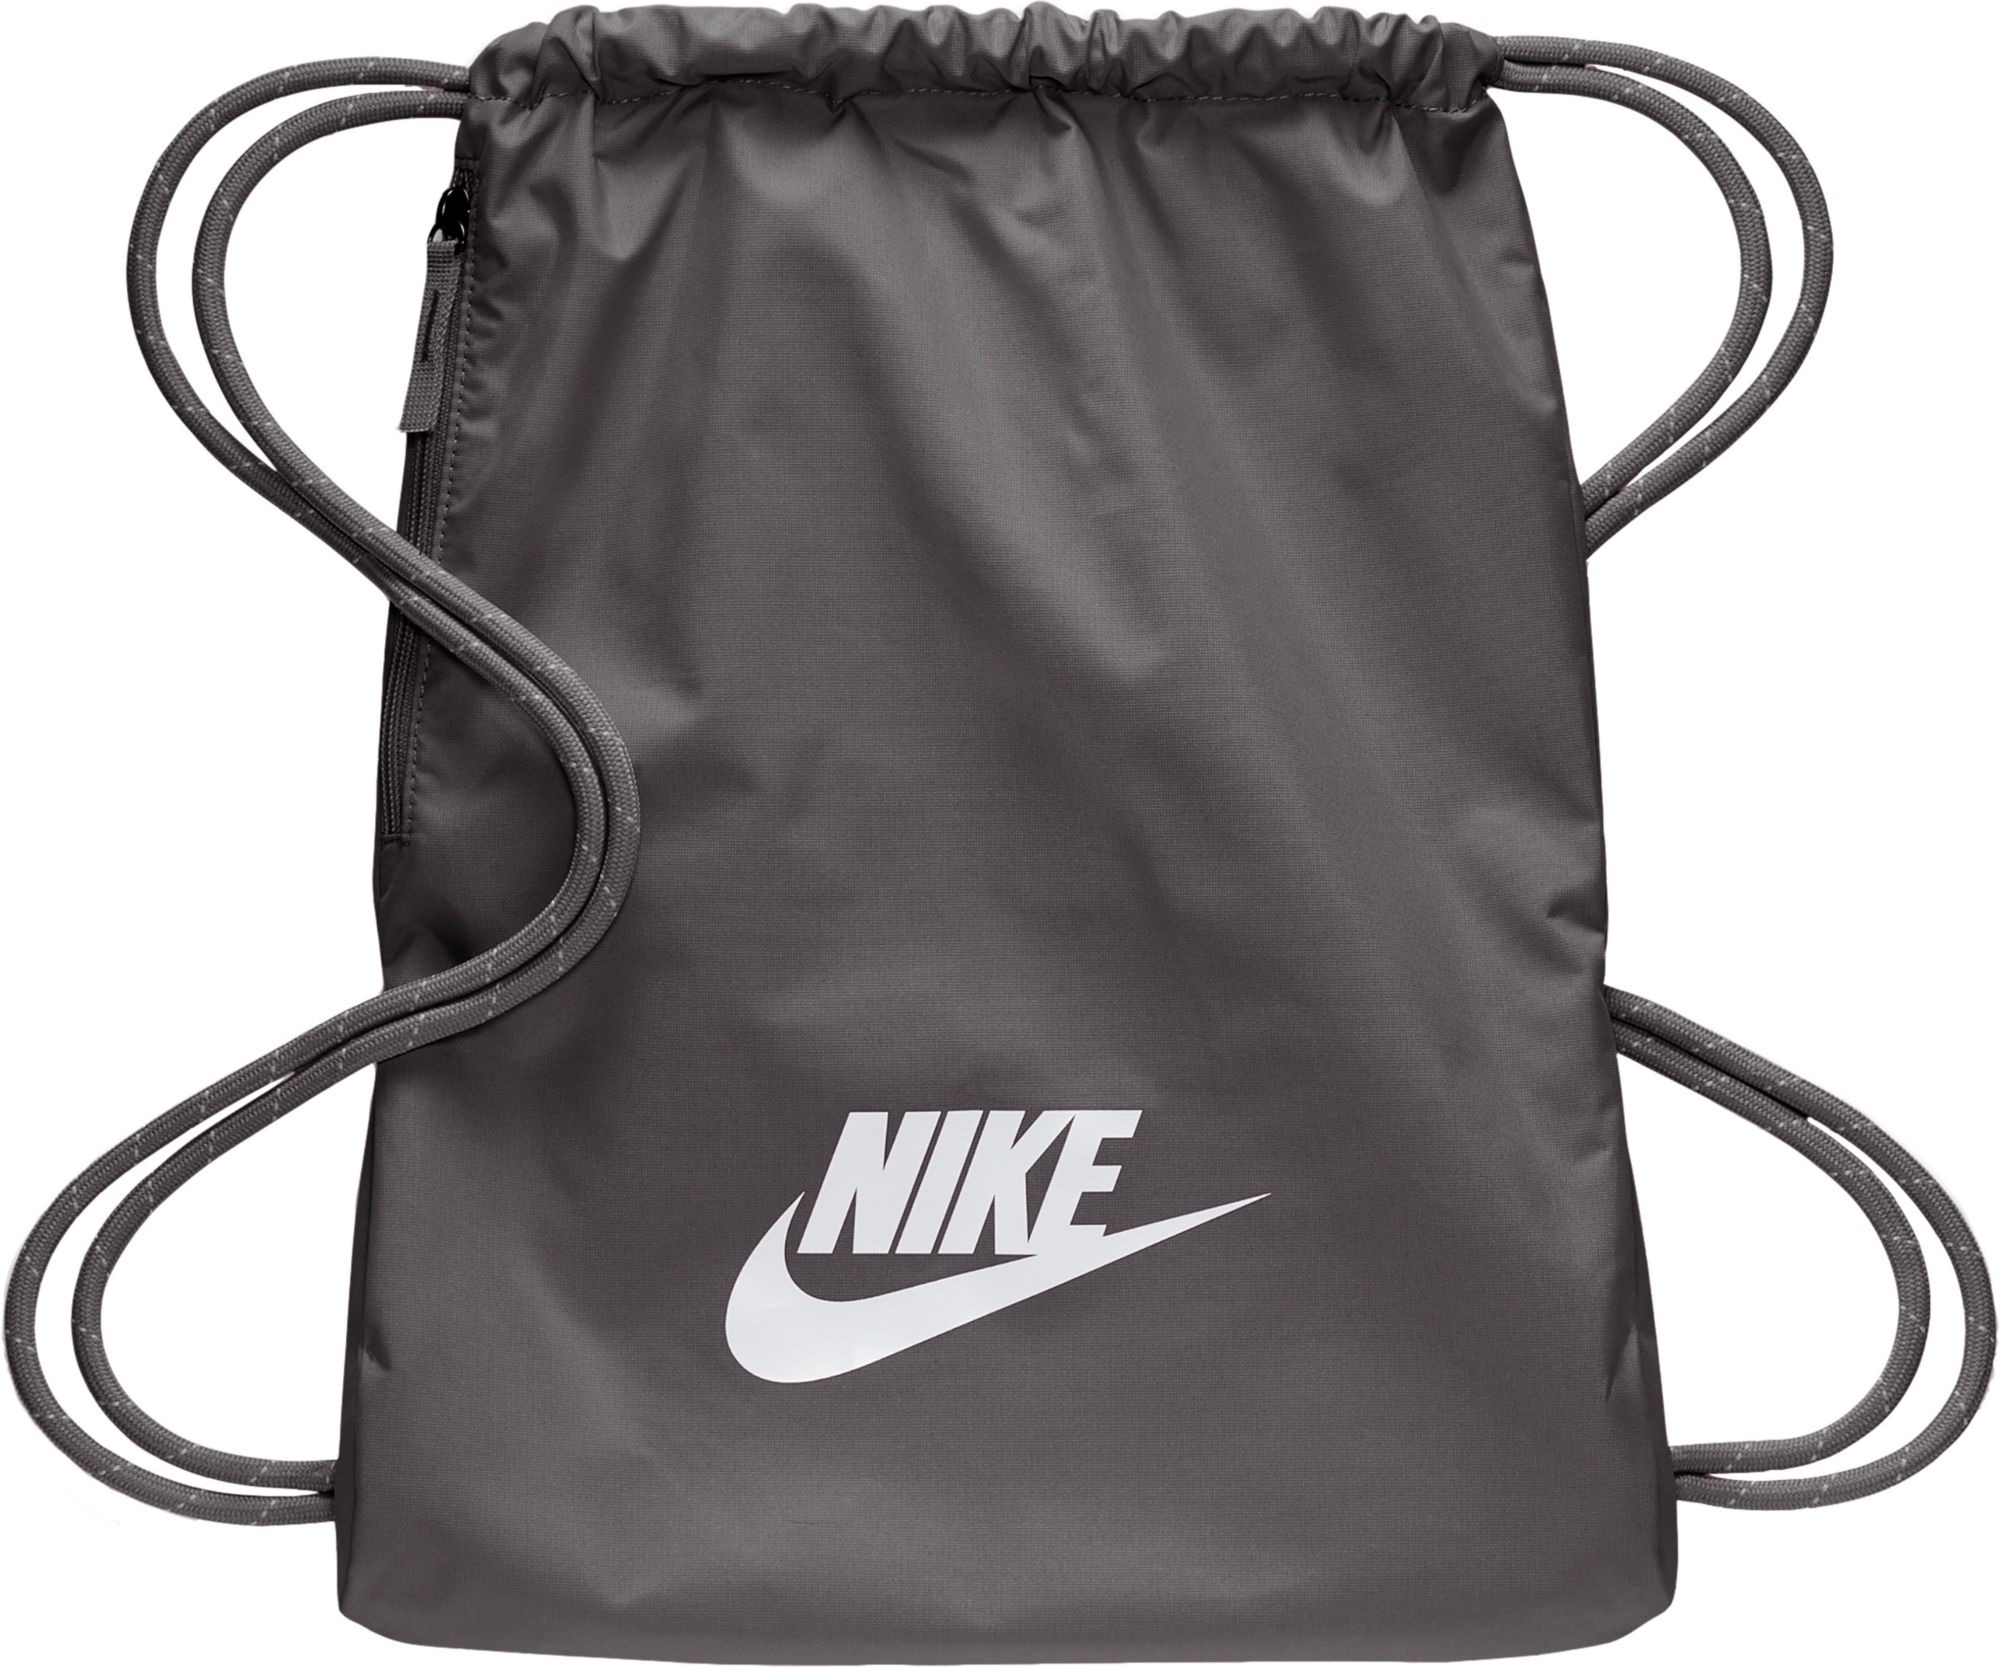 Sports Backpacks | Best Price Guarantee at DICK'S